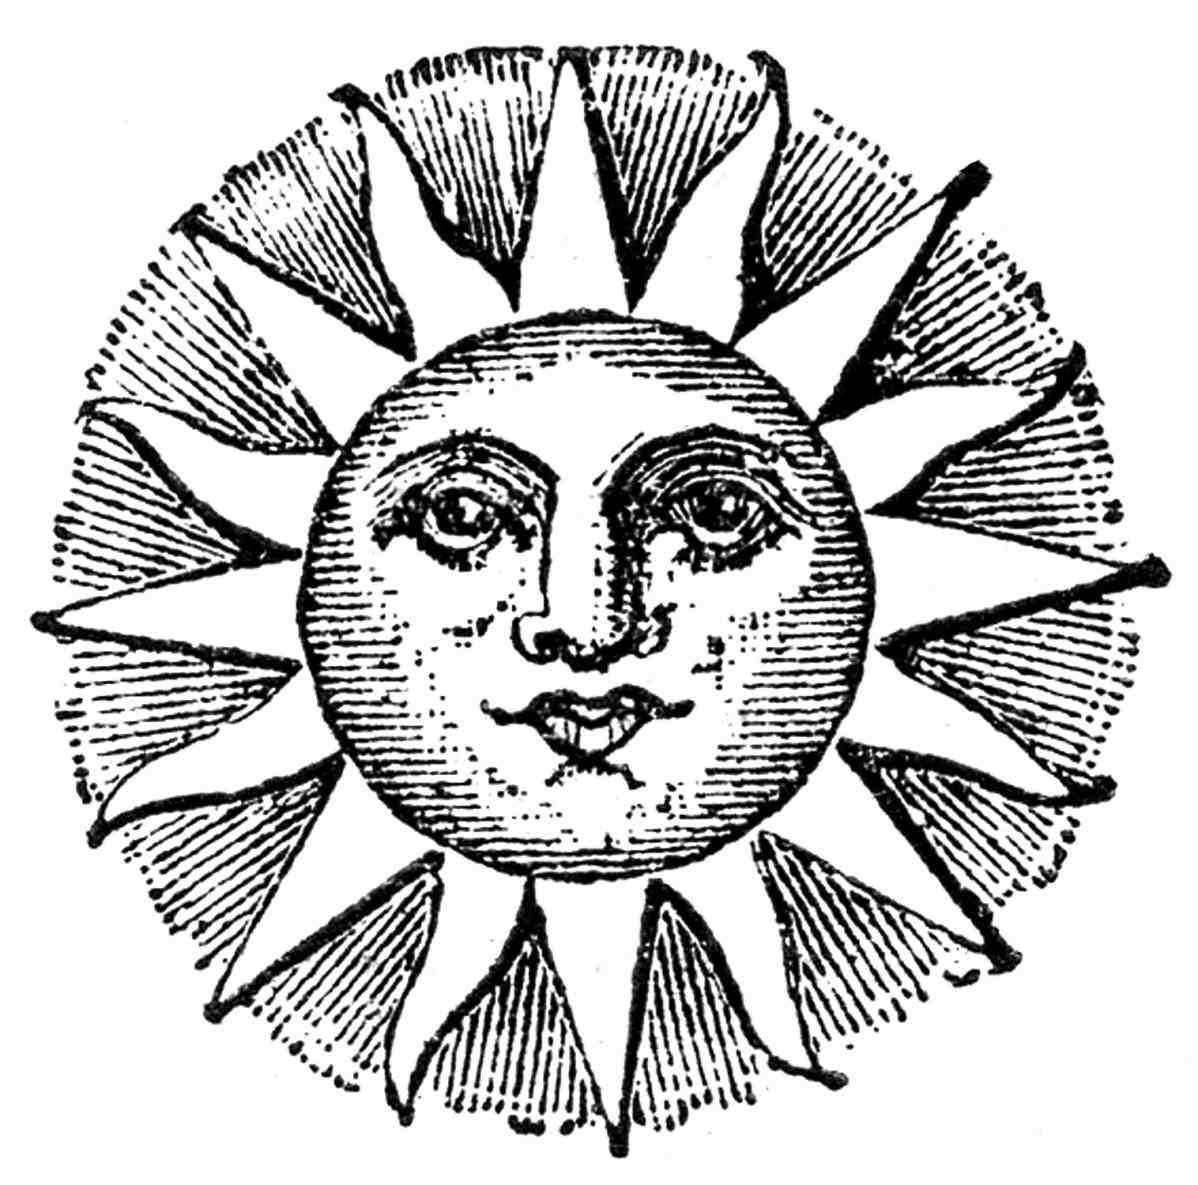 cool sun and moon drawings › copay.online